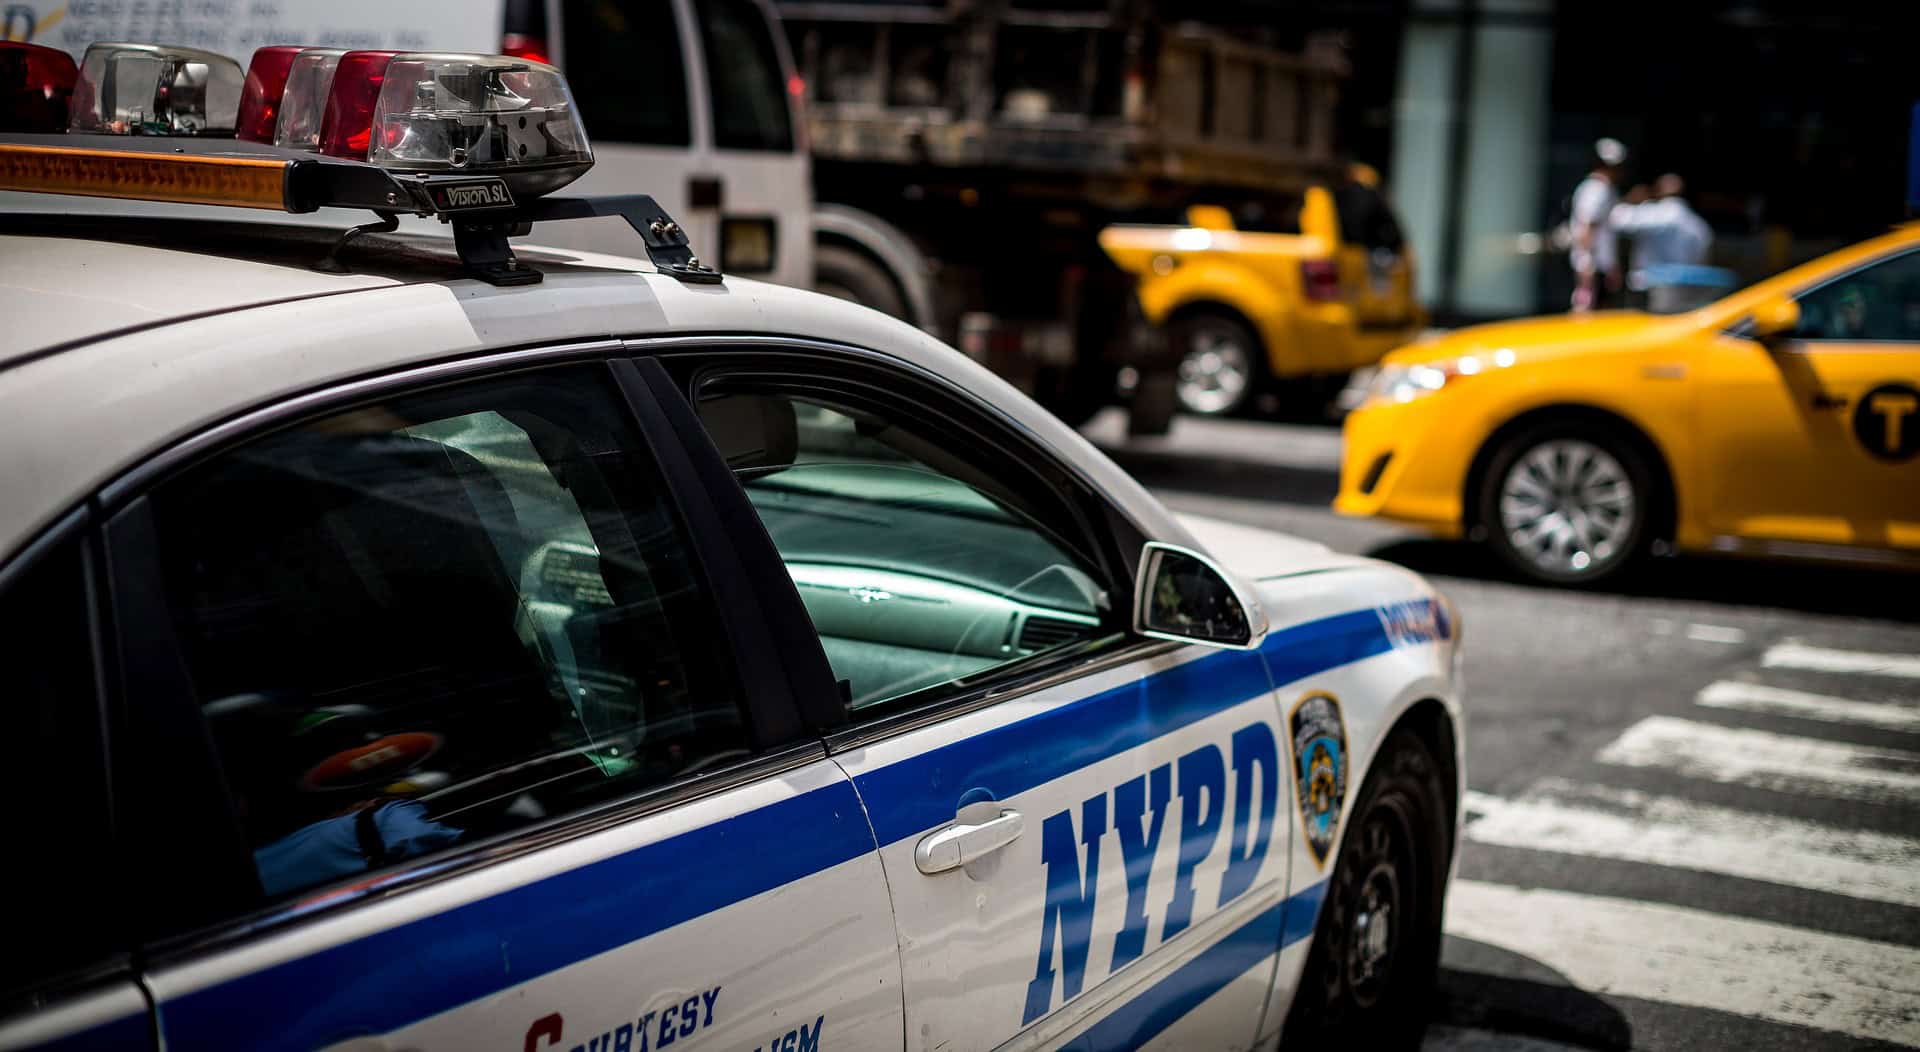 NYPD: June antisemitic hate crimes shot up 137% from last year